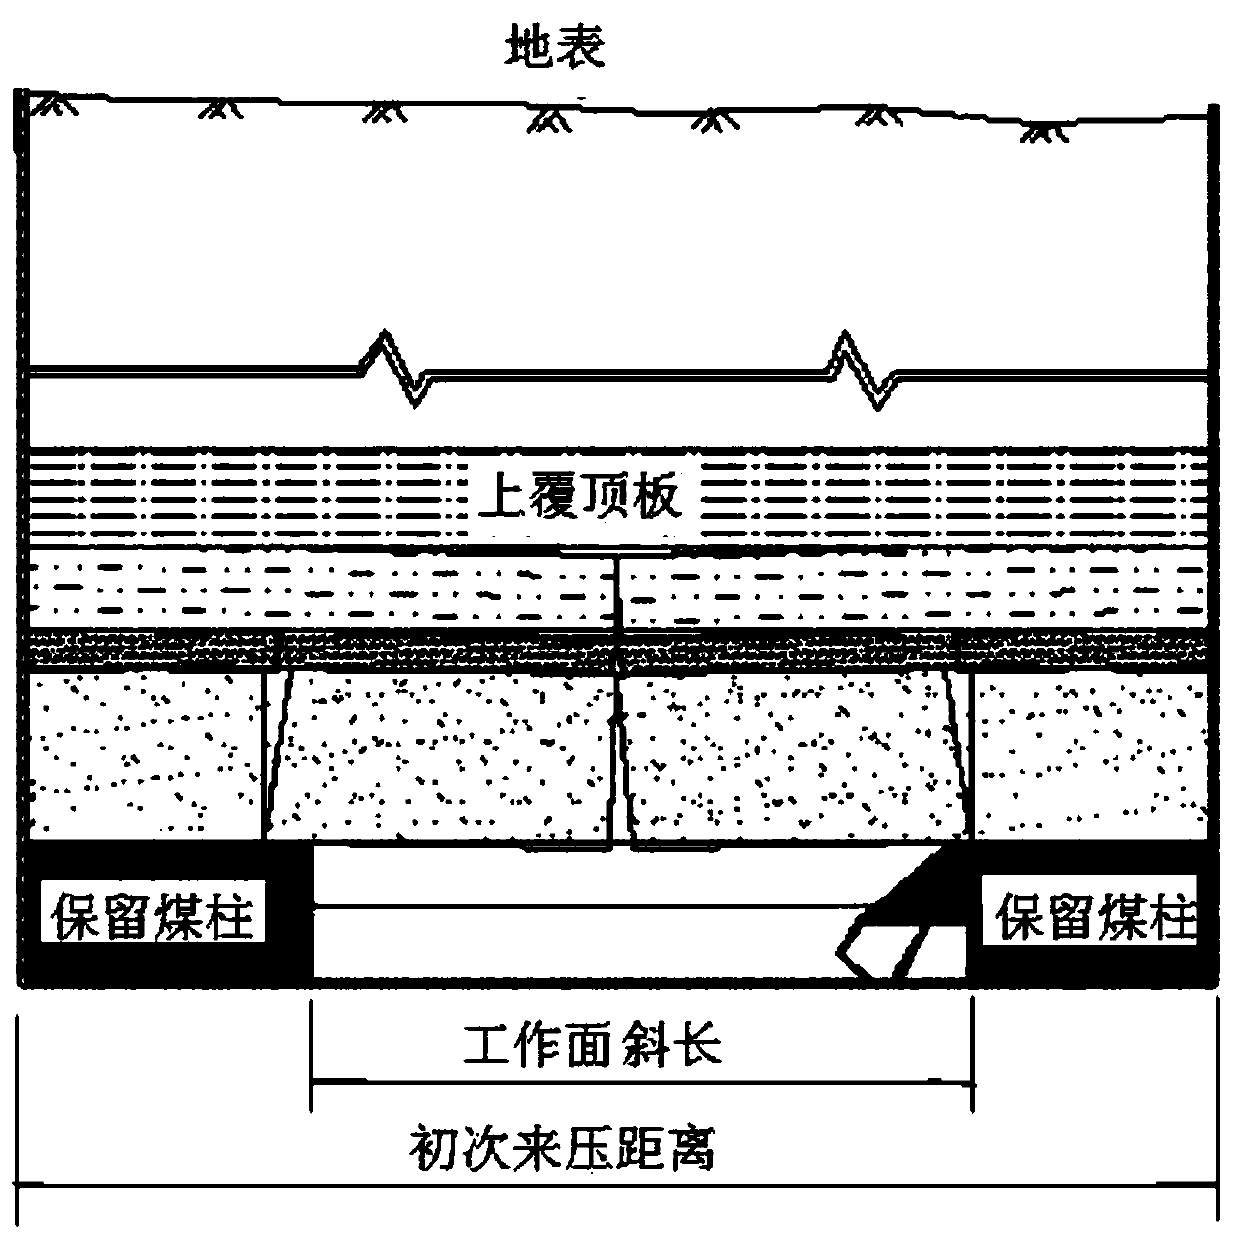 Strip fully-mechanized top coal caving high cut and fill mining method of thick coal seam under coal mine railway